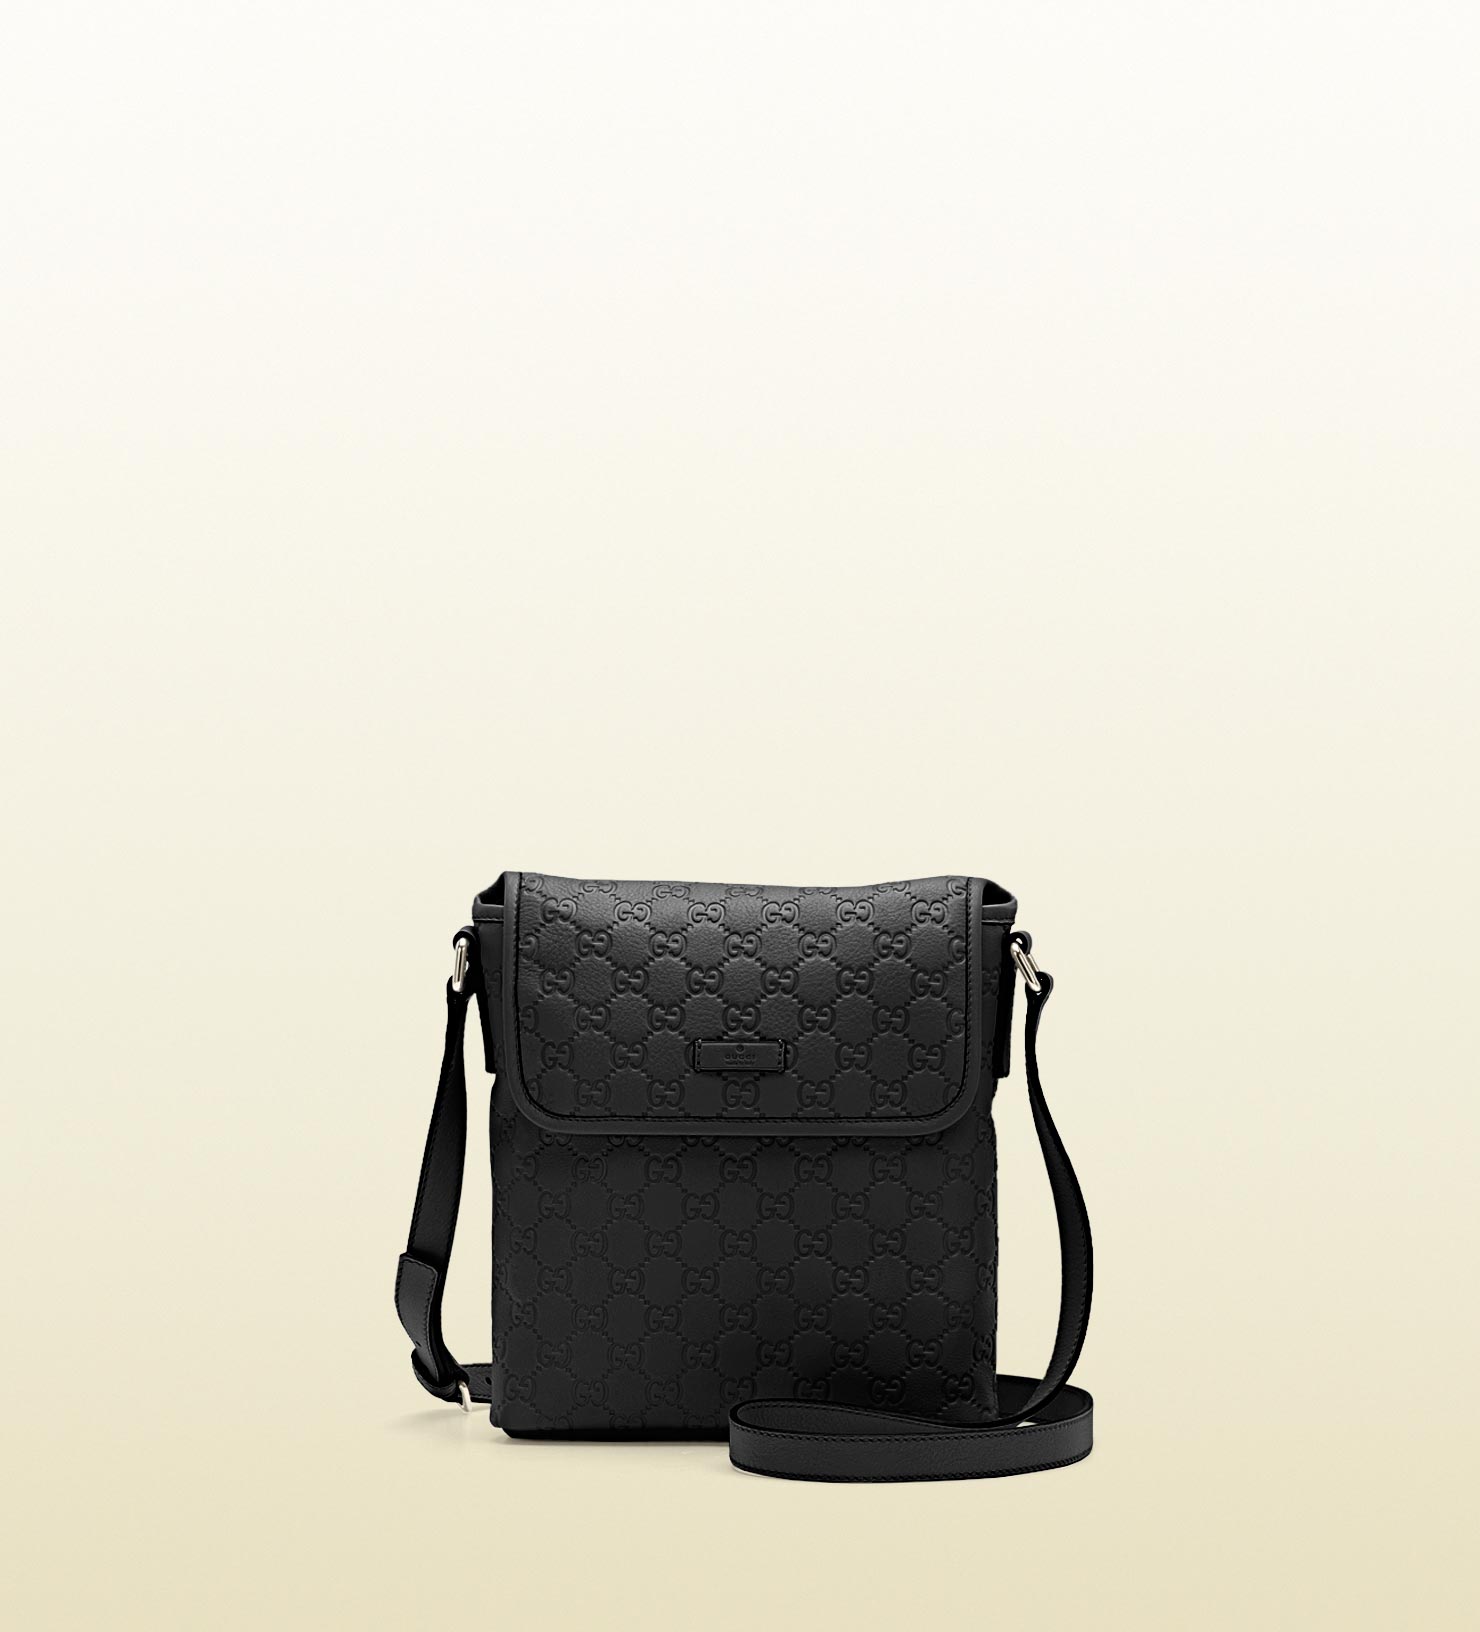 Gucci Small Messenger Bag in Black for Men - Lyst